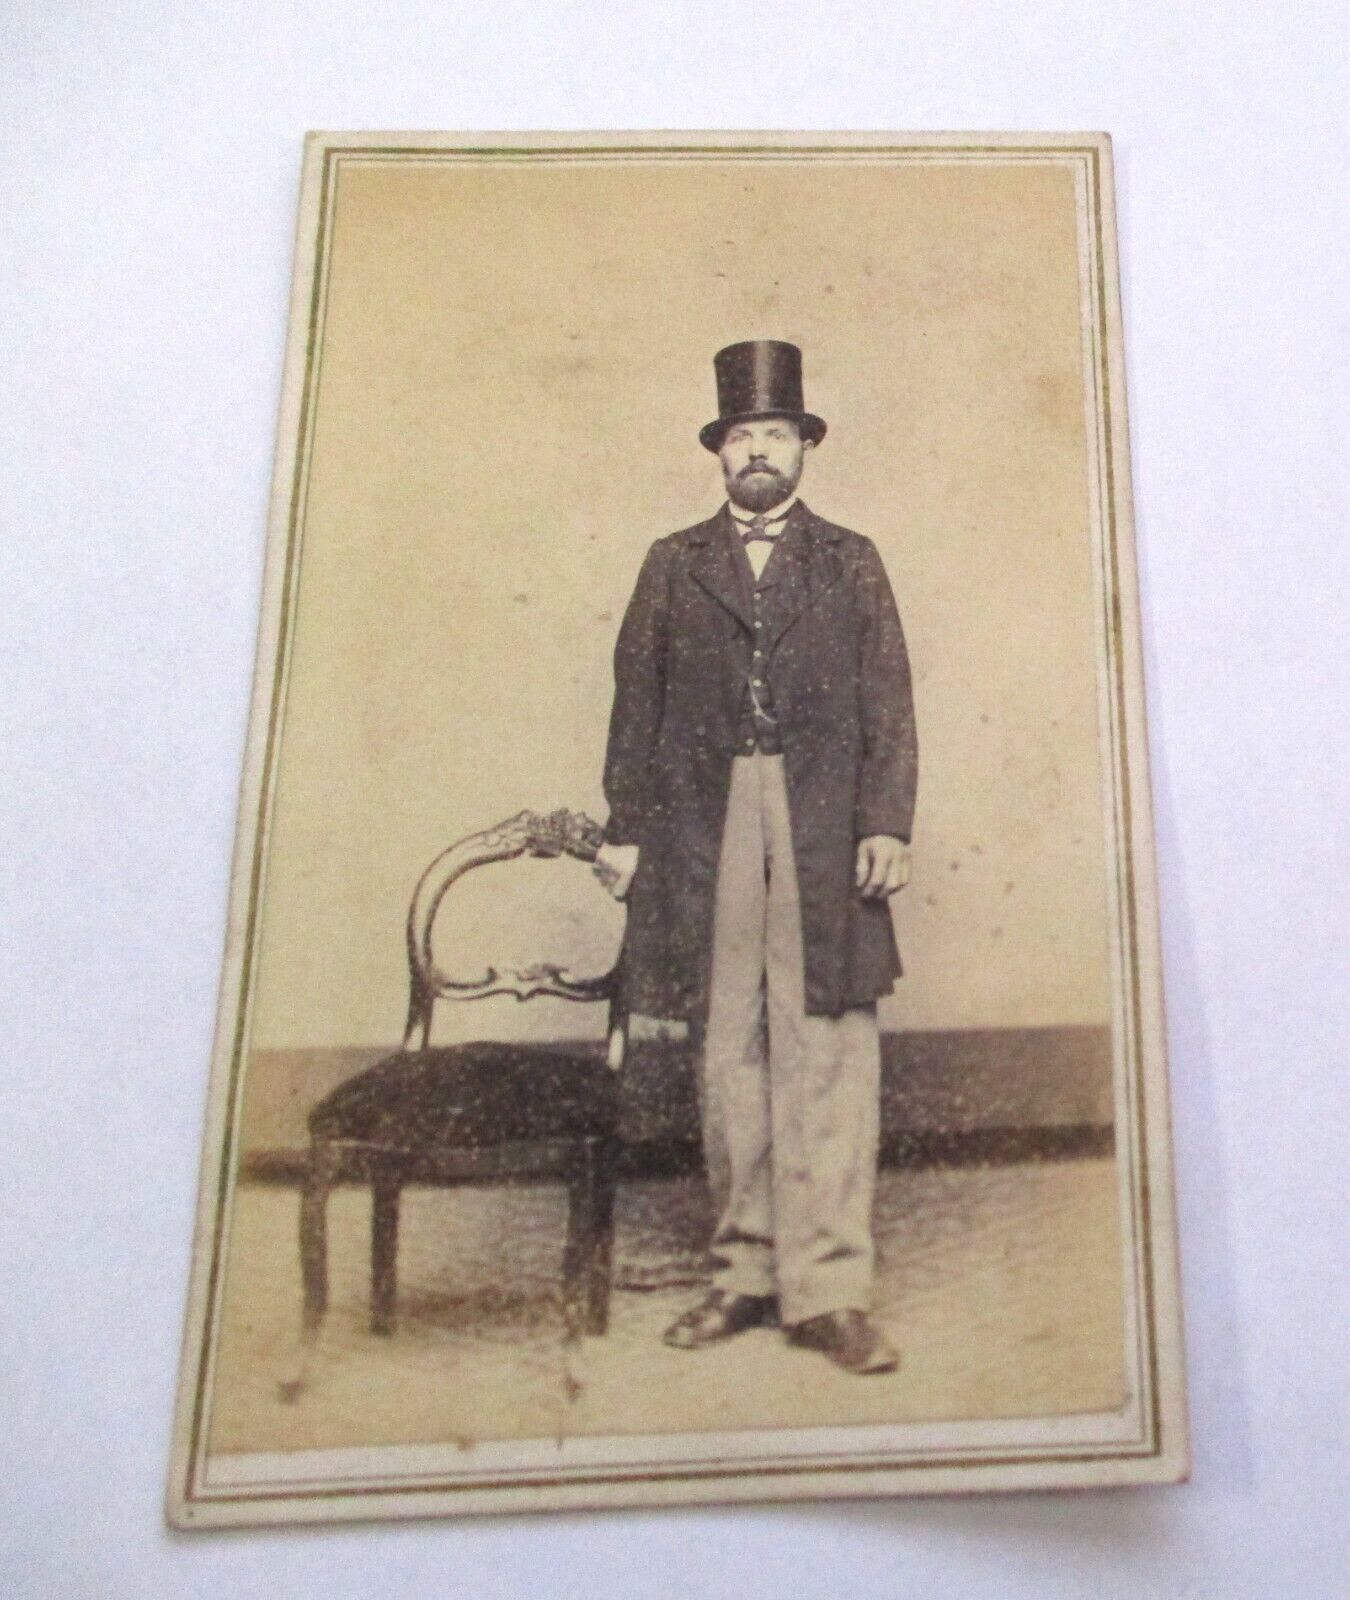 ANTIQUE J.D. DODGE 114 HANOVER ST. BOSTON REAL PHOTO VICTORIAN TRADE CARD